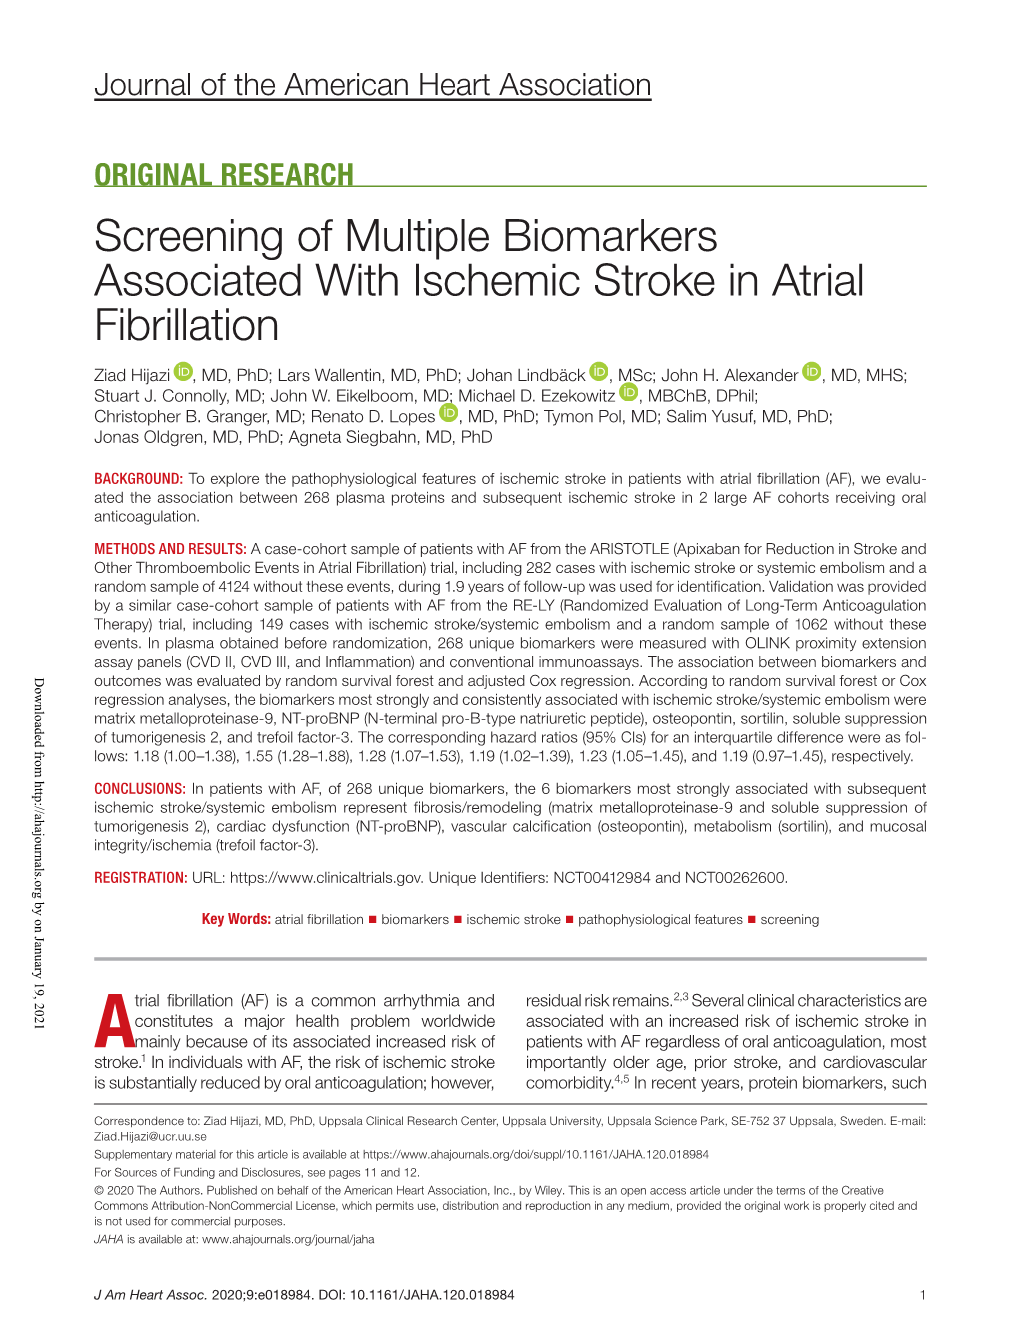 Screening of Multiple Biomarkers Associated with Ischemic Stroke in Atrial Fibrillation